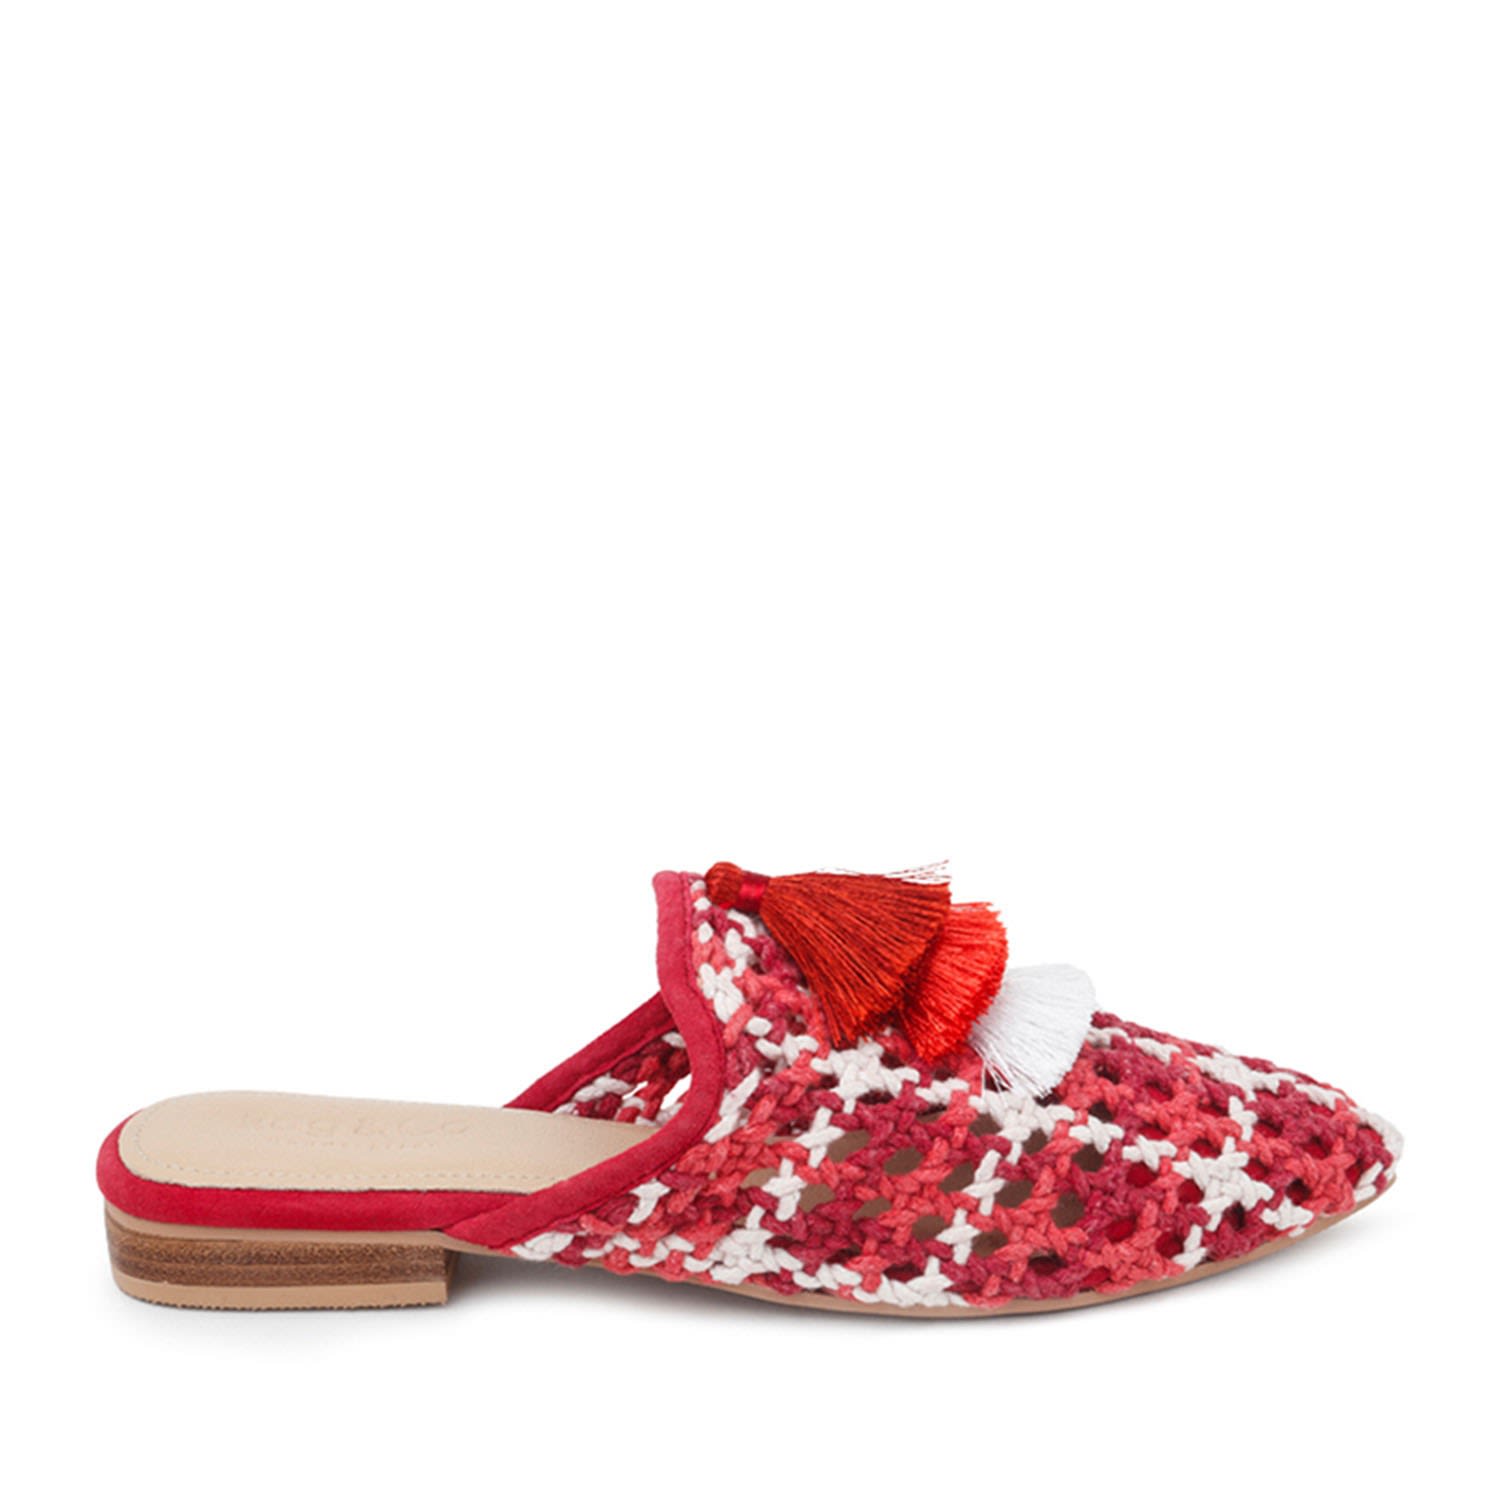 Rag & Co Women's Mariana Red Woven Flat Mules With Tassels